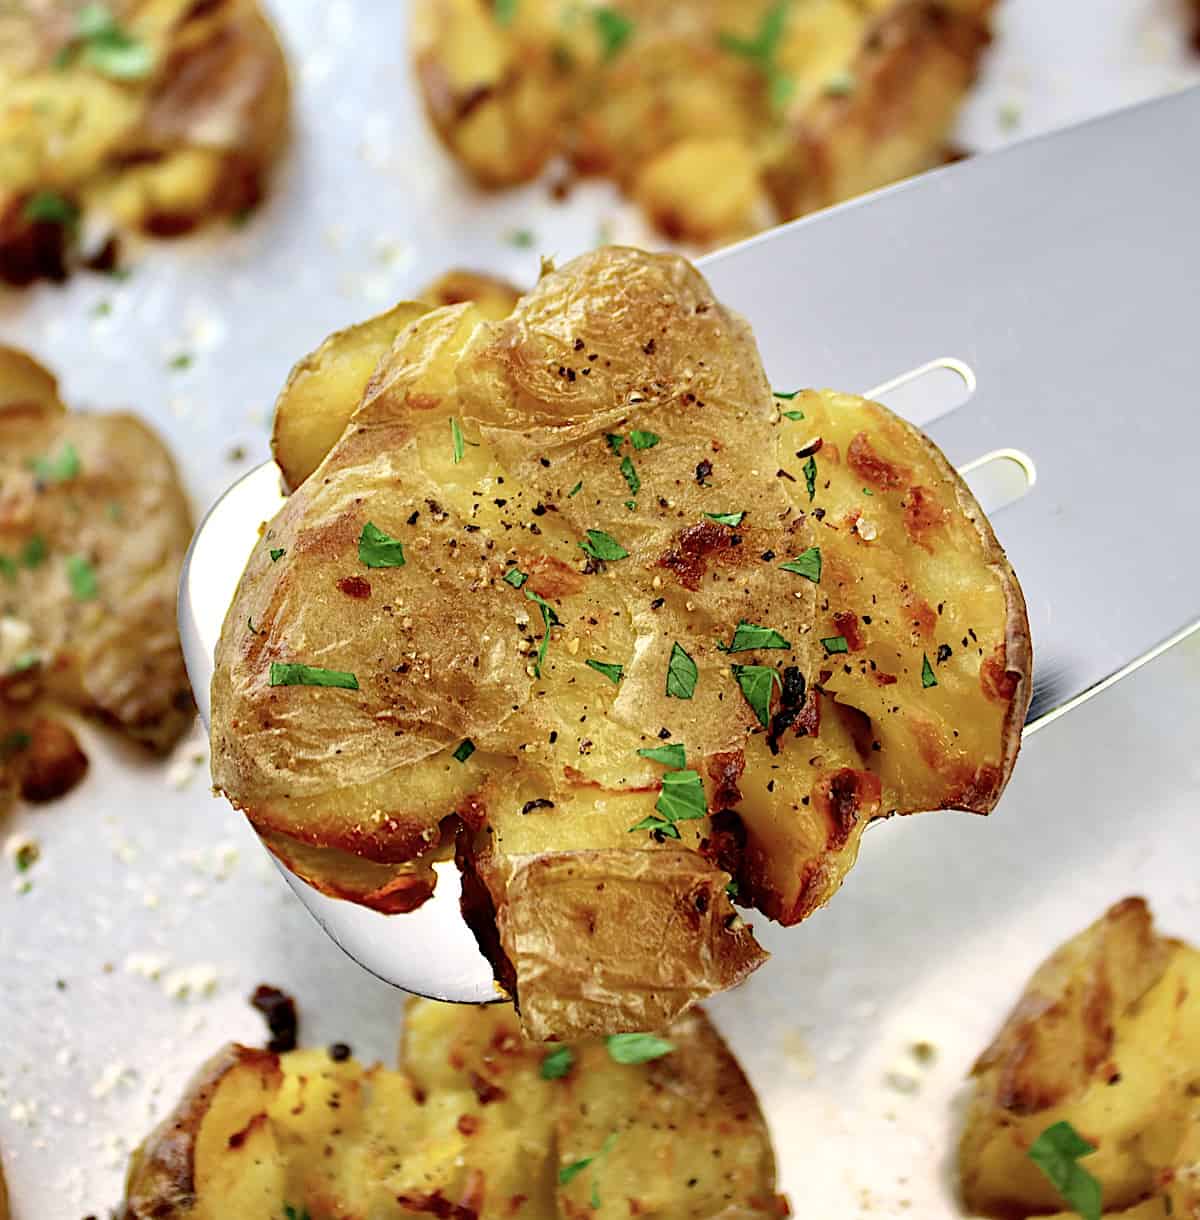 Crispy Smashed Potato being held up by spatula over baking sheet